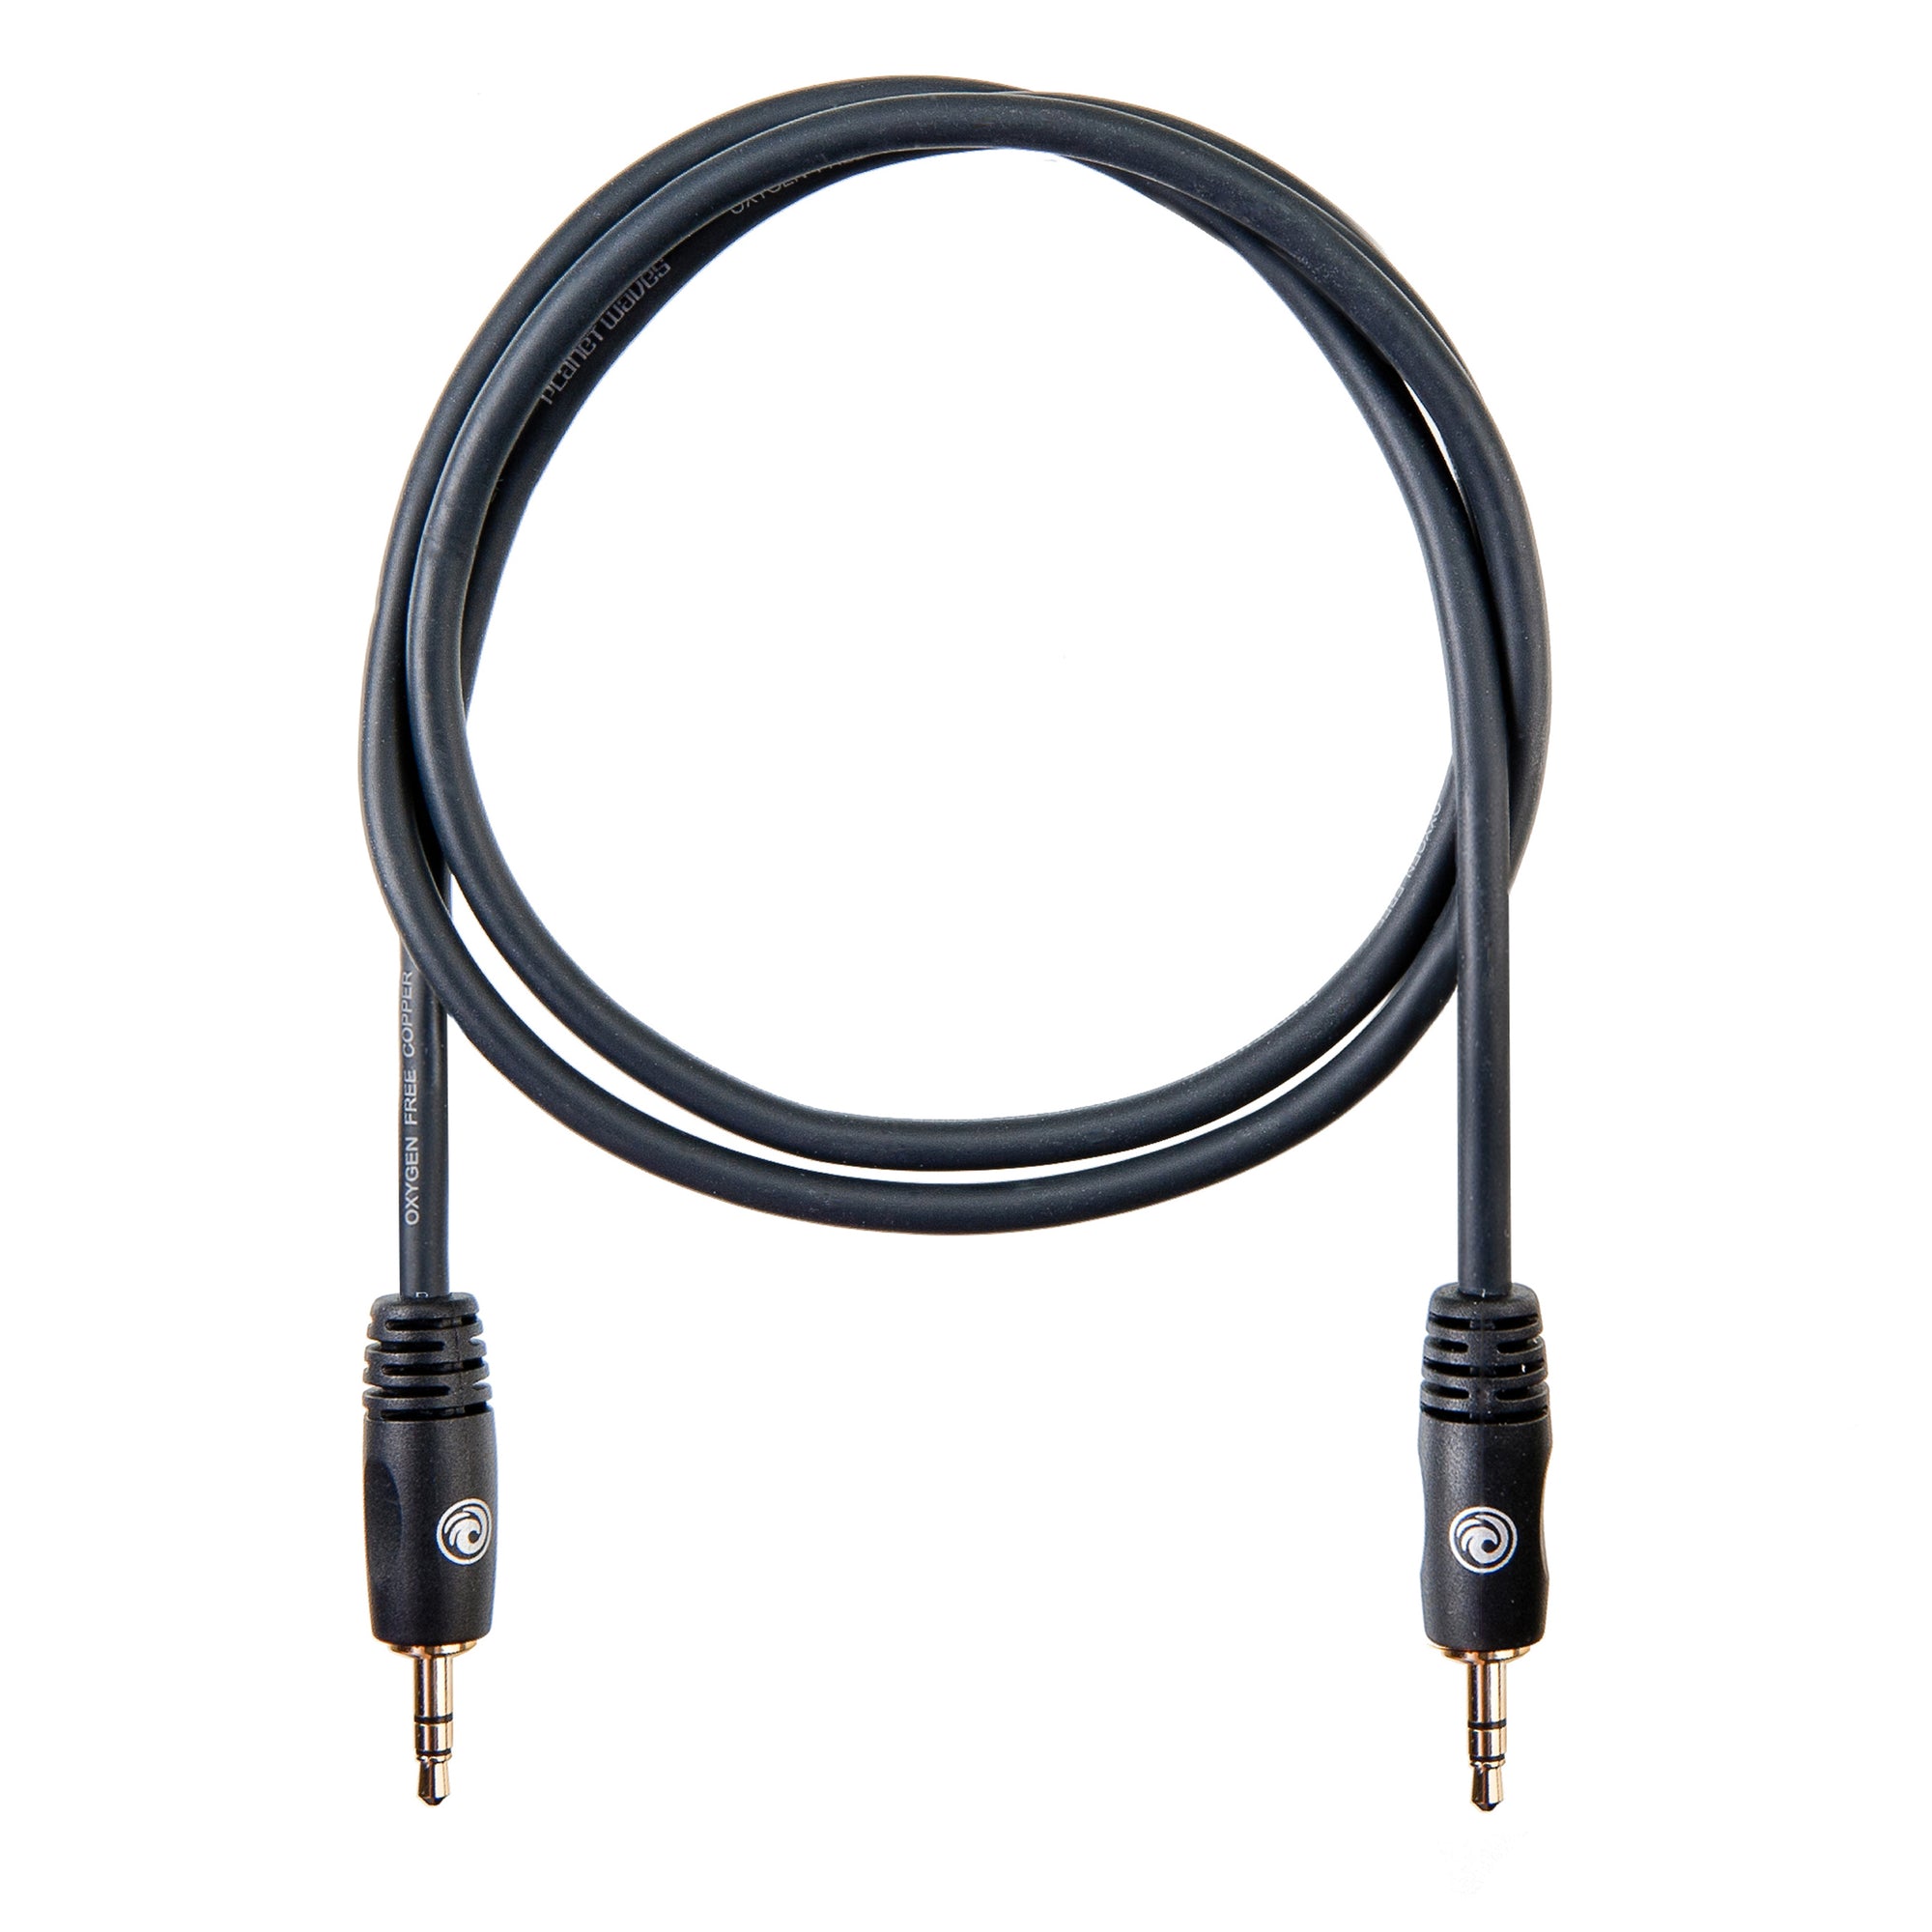 D'Addario 1/8 Inch to 1/8 Inch Stereo Cable 3 ft PW-MC-03